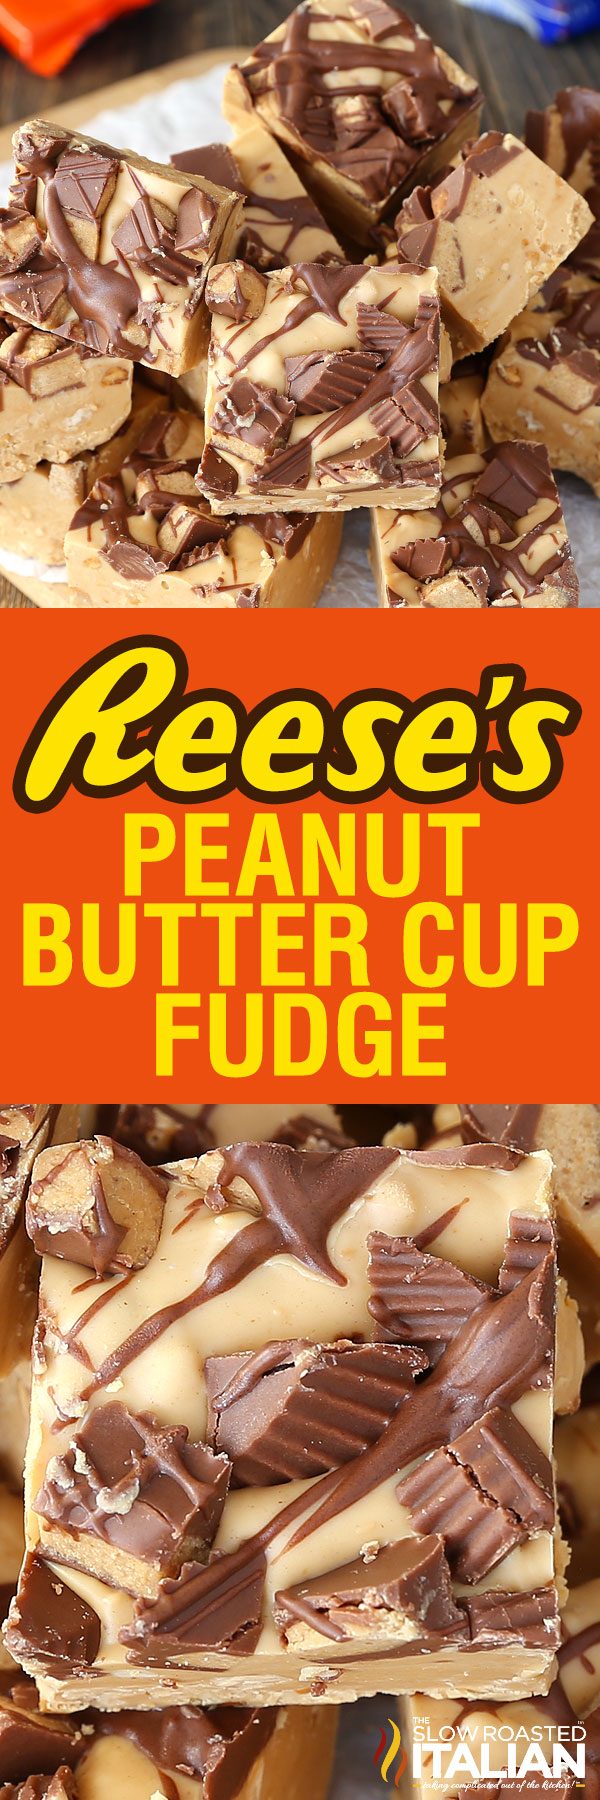 reeses peanut butter cup fudge 